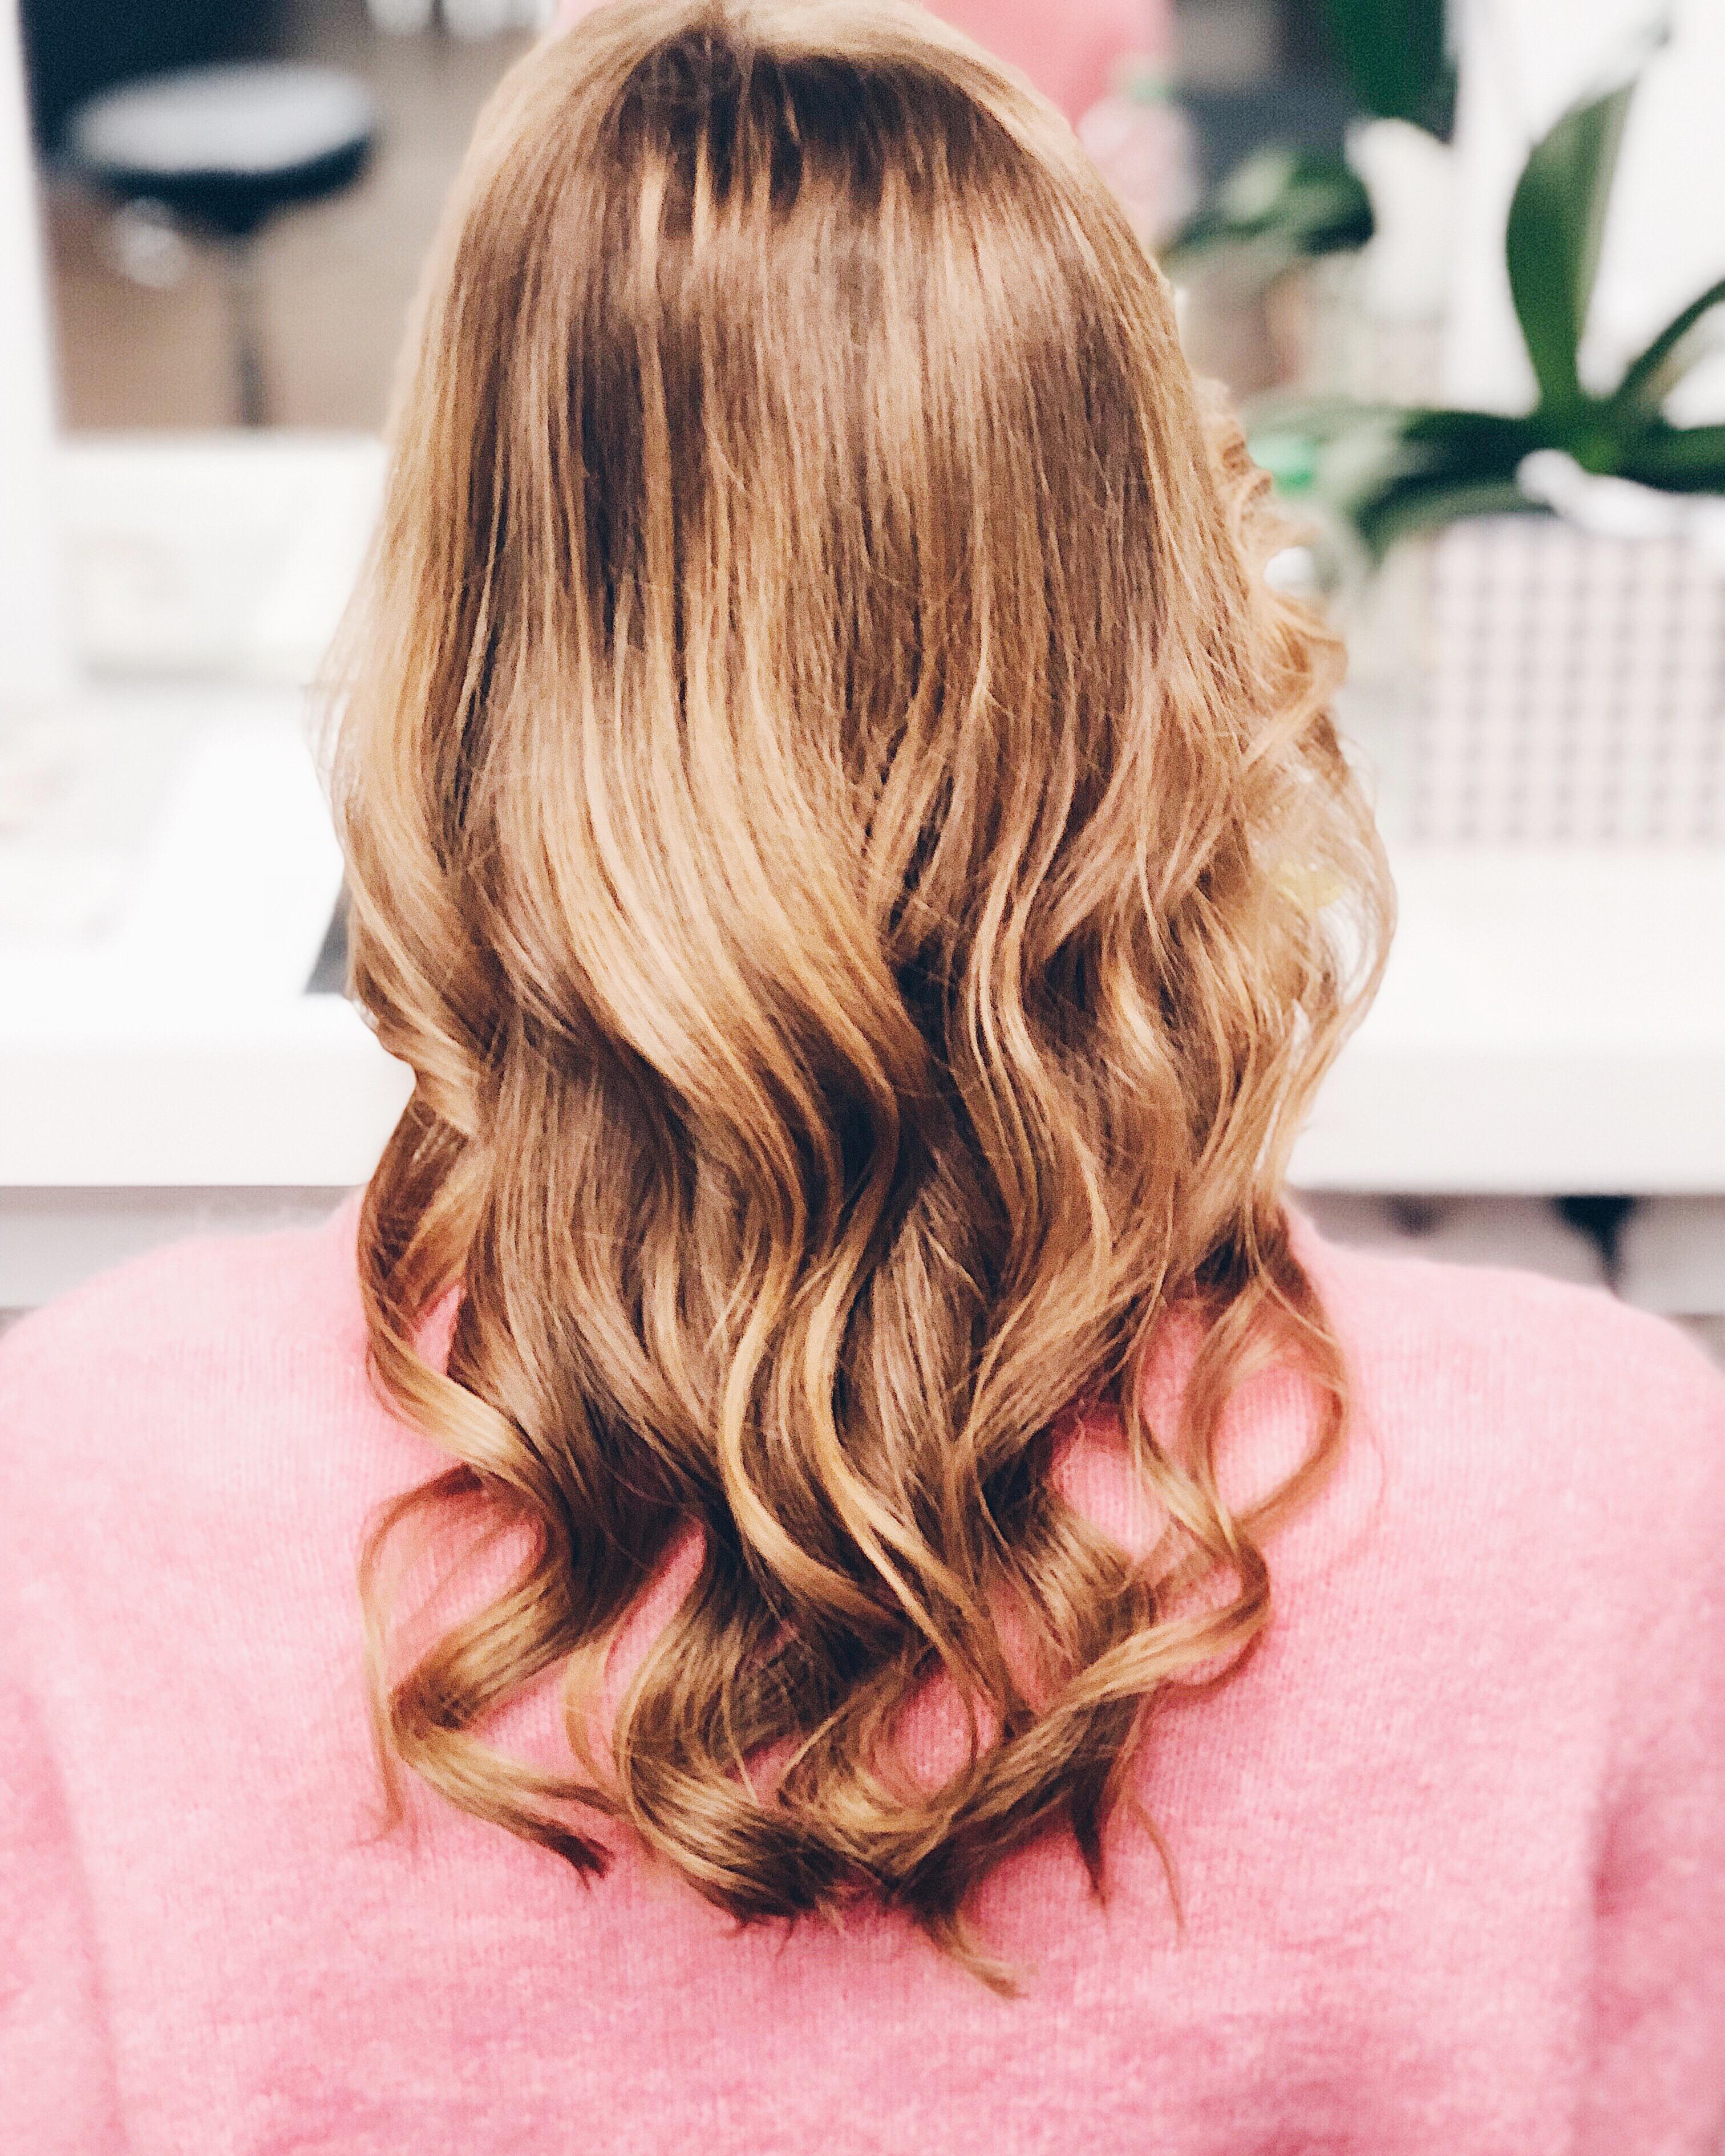 Waves💆‍♀️ #frisur #style #look 